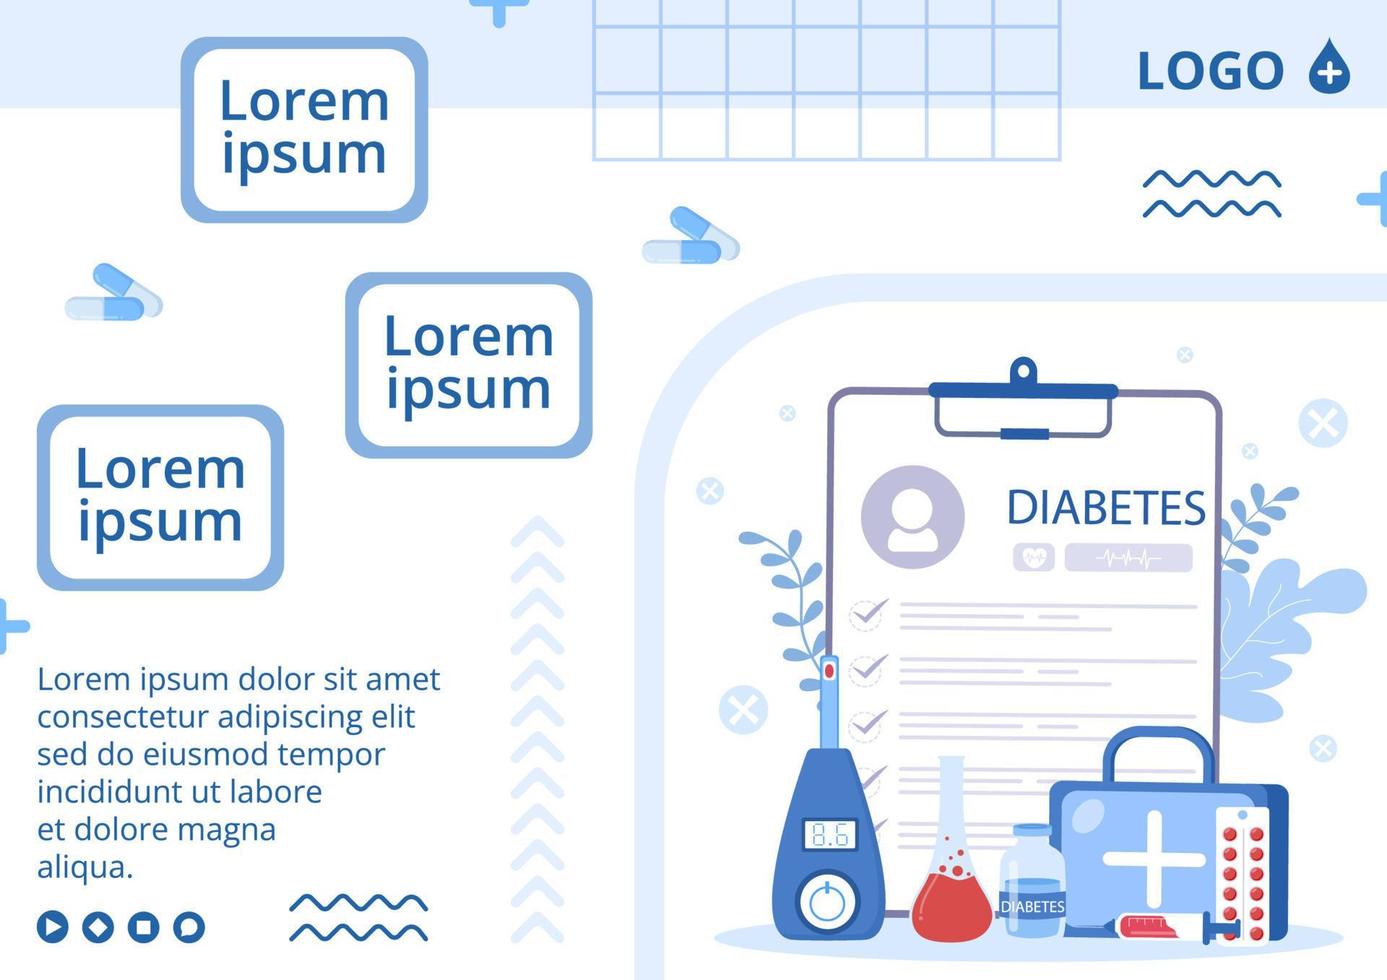 Diabetes Testing Brochure Template Flat Design Illustration Editable of Square Background Suitable for Healthcare Social media or Greetings Card vector